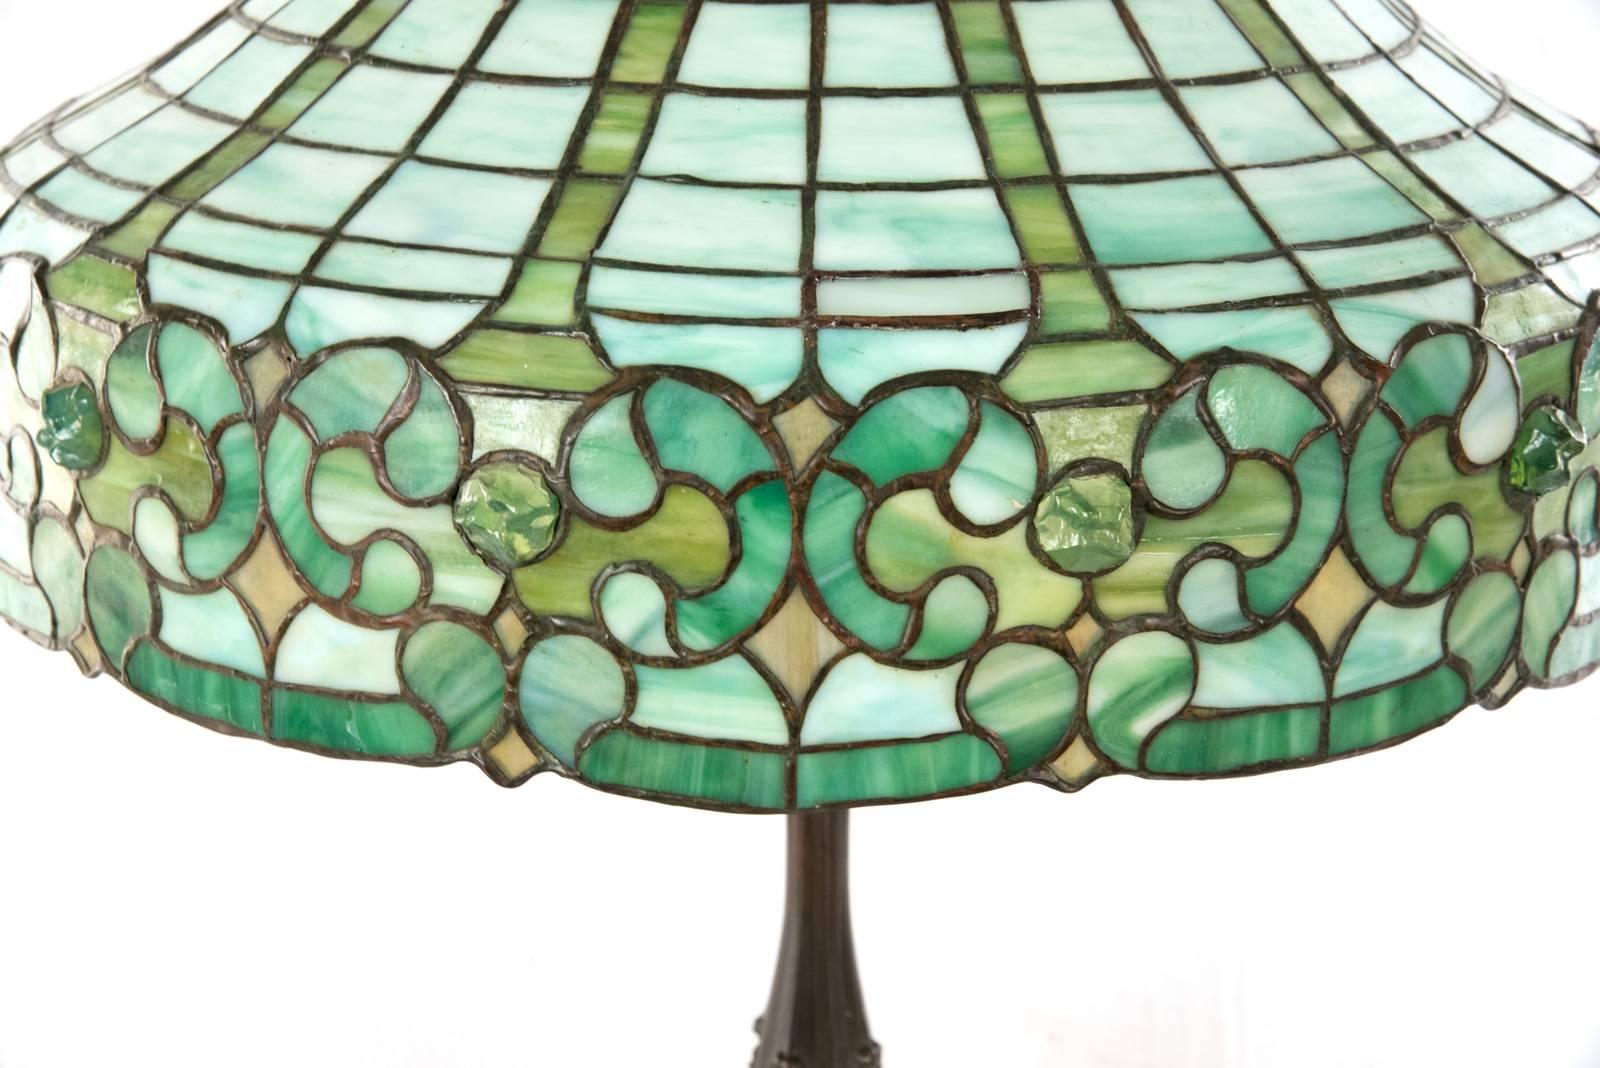 Made by the JA Whaley of New York, this handsome leaded glass and bronze table lamp with a faceted shade comprised of individually camed panels of various types of green glass over an apron of corresponding c-scroll and medallion panels, sitting